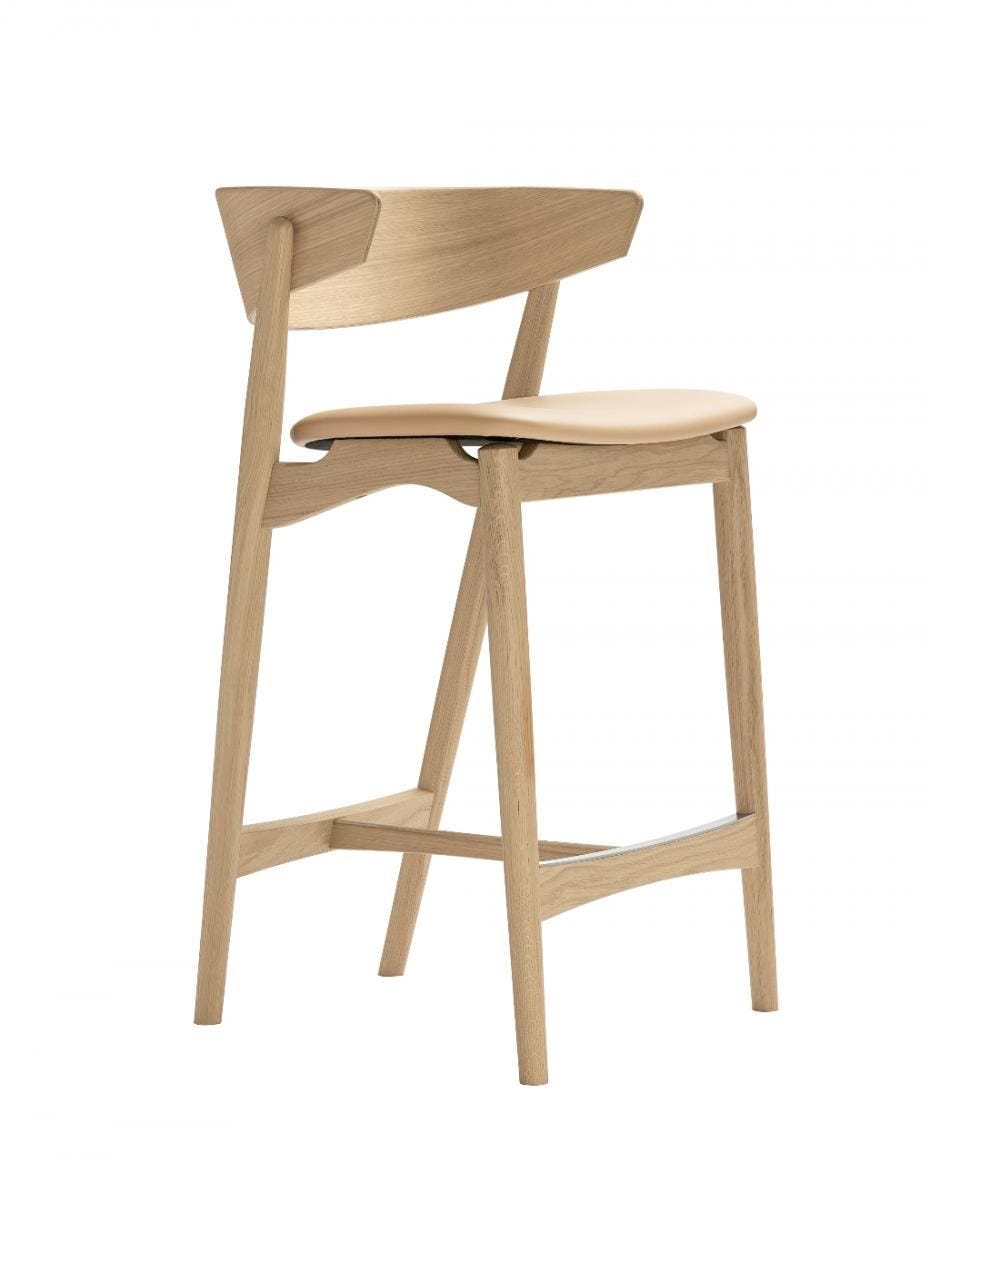 Sibast No 7 Stool With Back Rest Oak Soap Honey Leather Kitchen Counter Stool 65cm Light Wood Designer Furniture From Holloways Of Ludlow